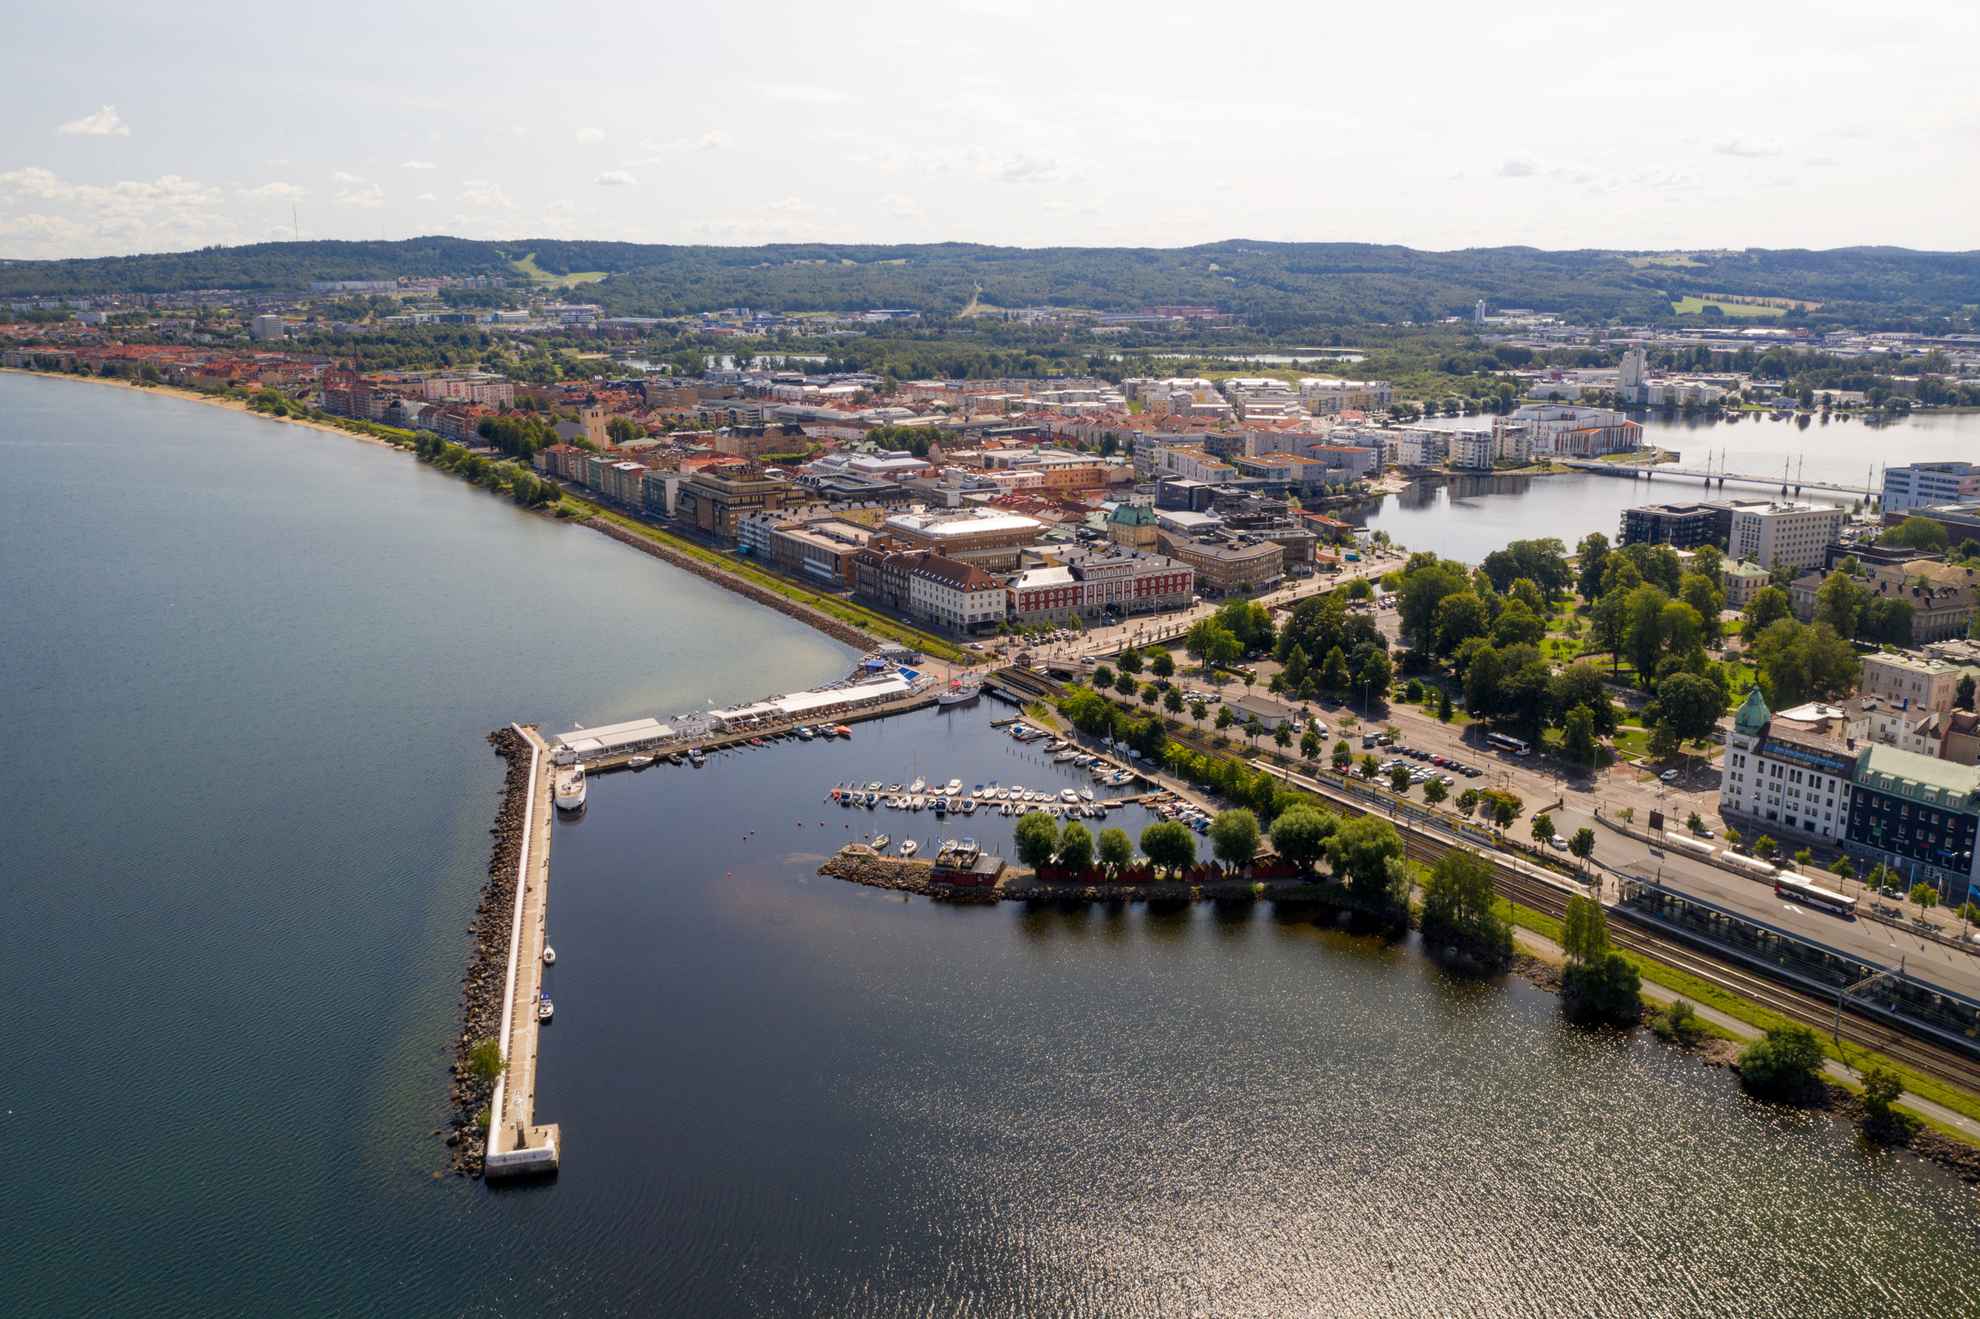 Aerial view of the city of Jönköping with the long pier leading into Lake Vättern.